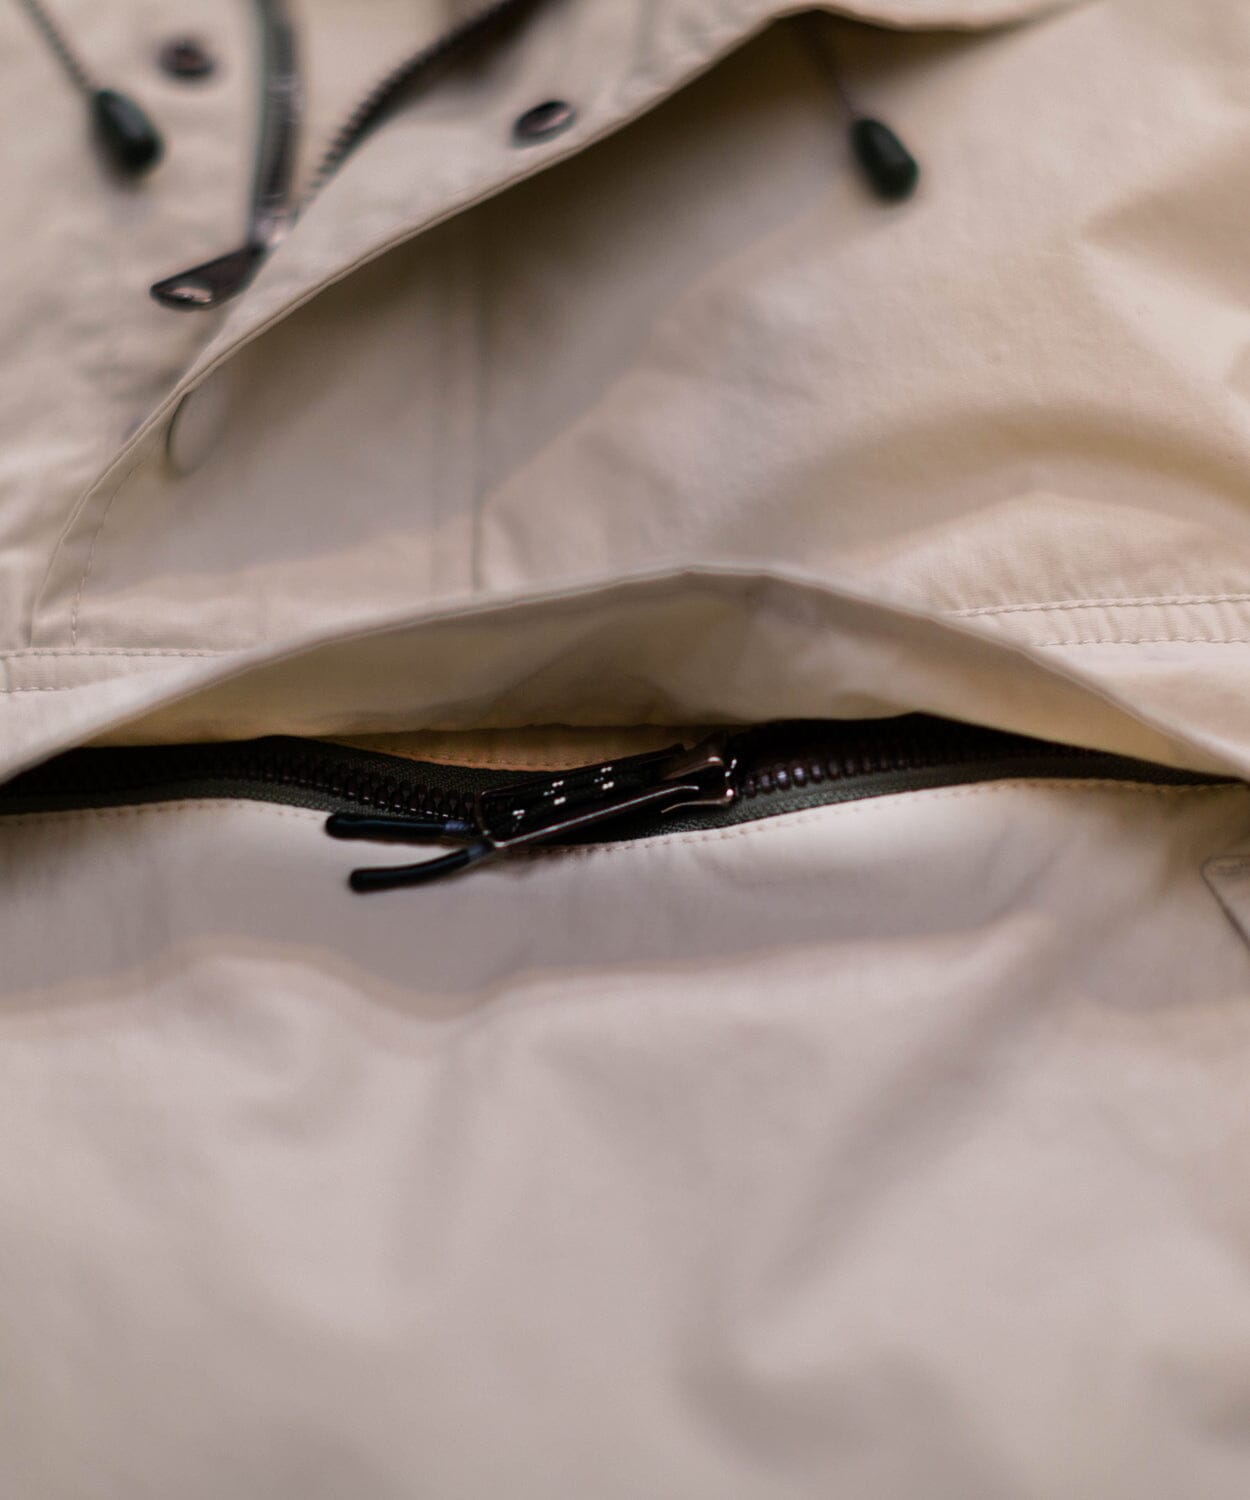 mens anorak jacket by oobe brand, close up